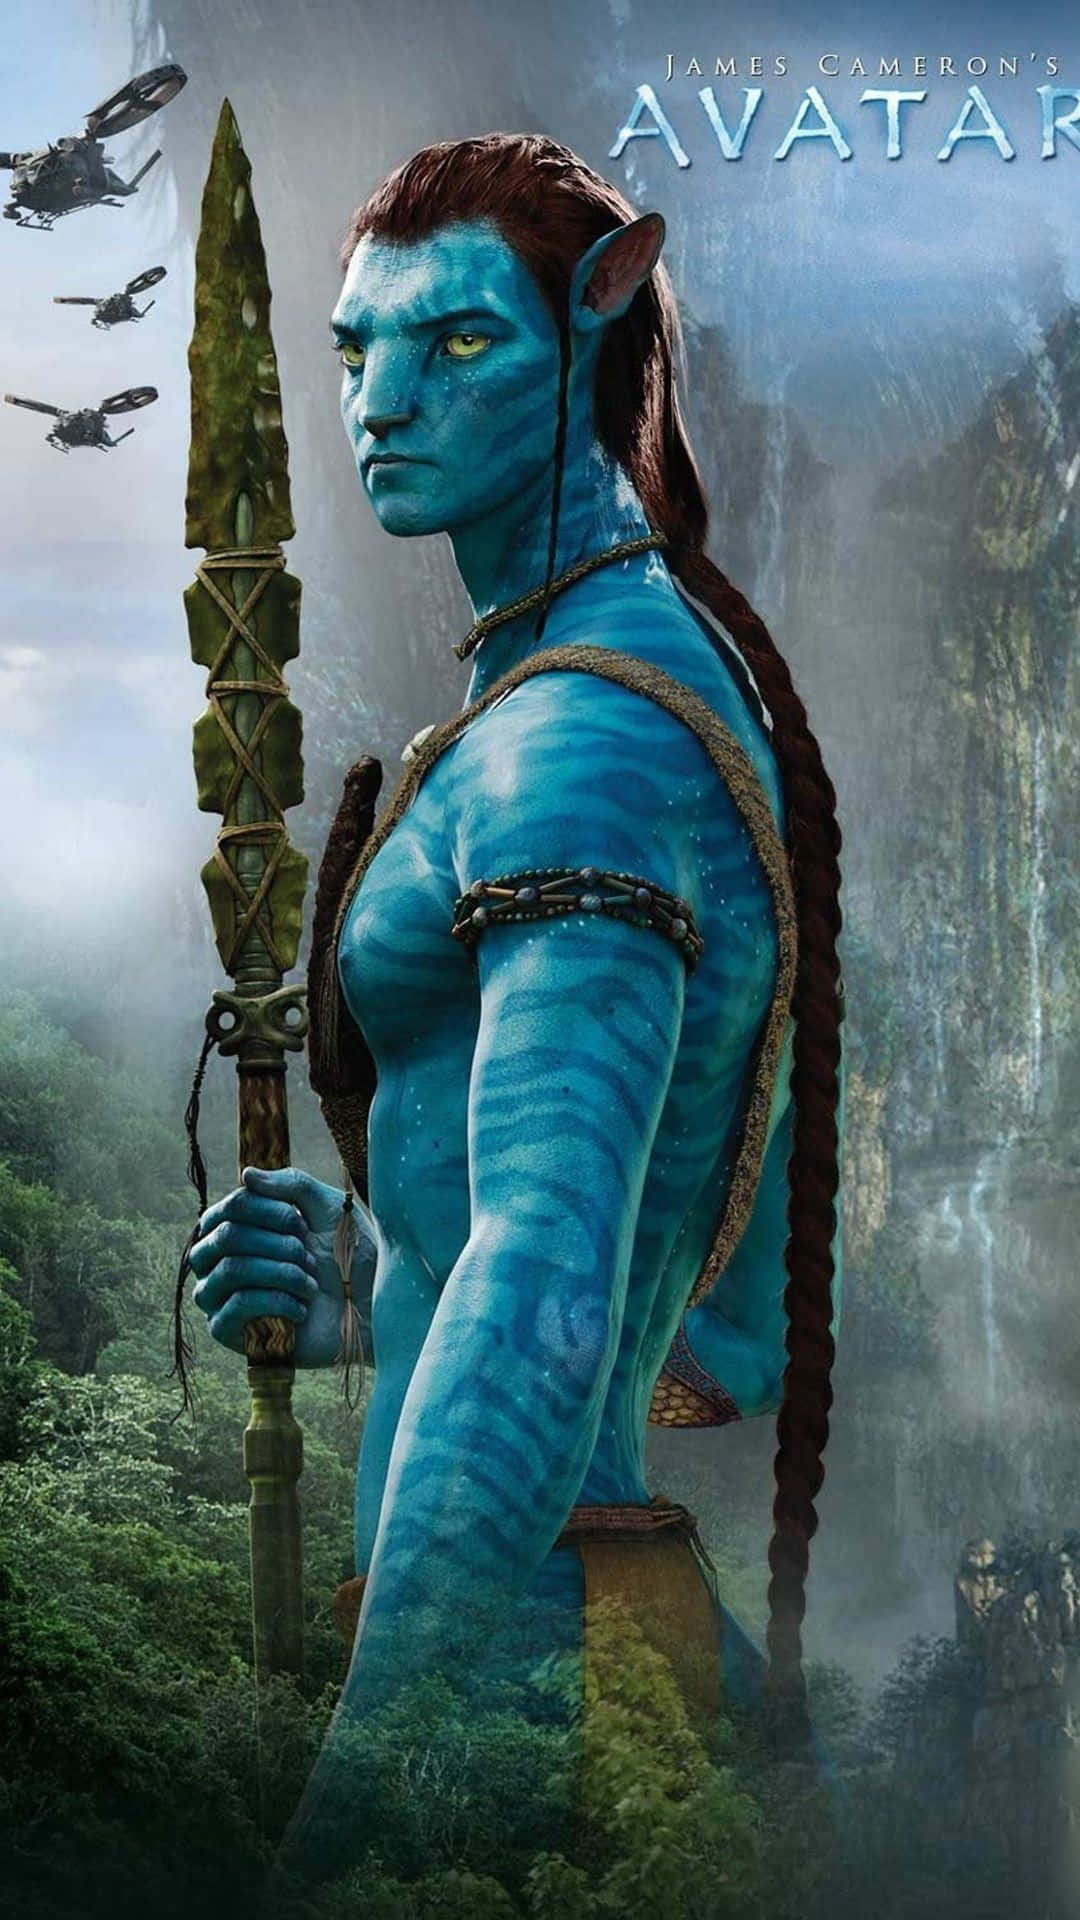 A scene from the epic film Avatar